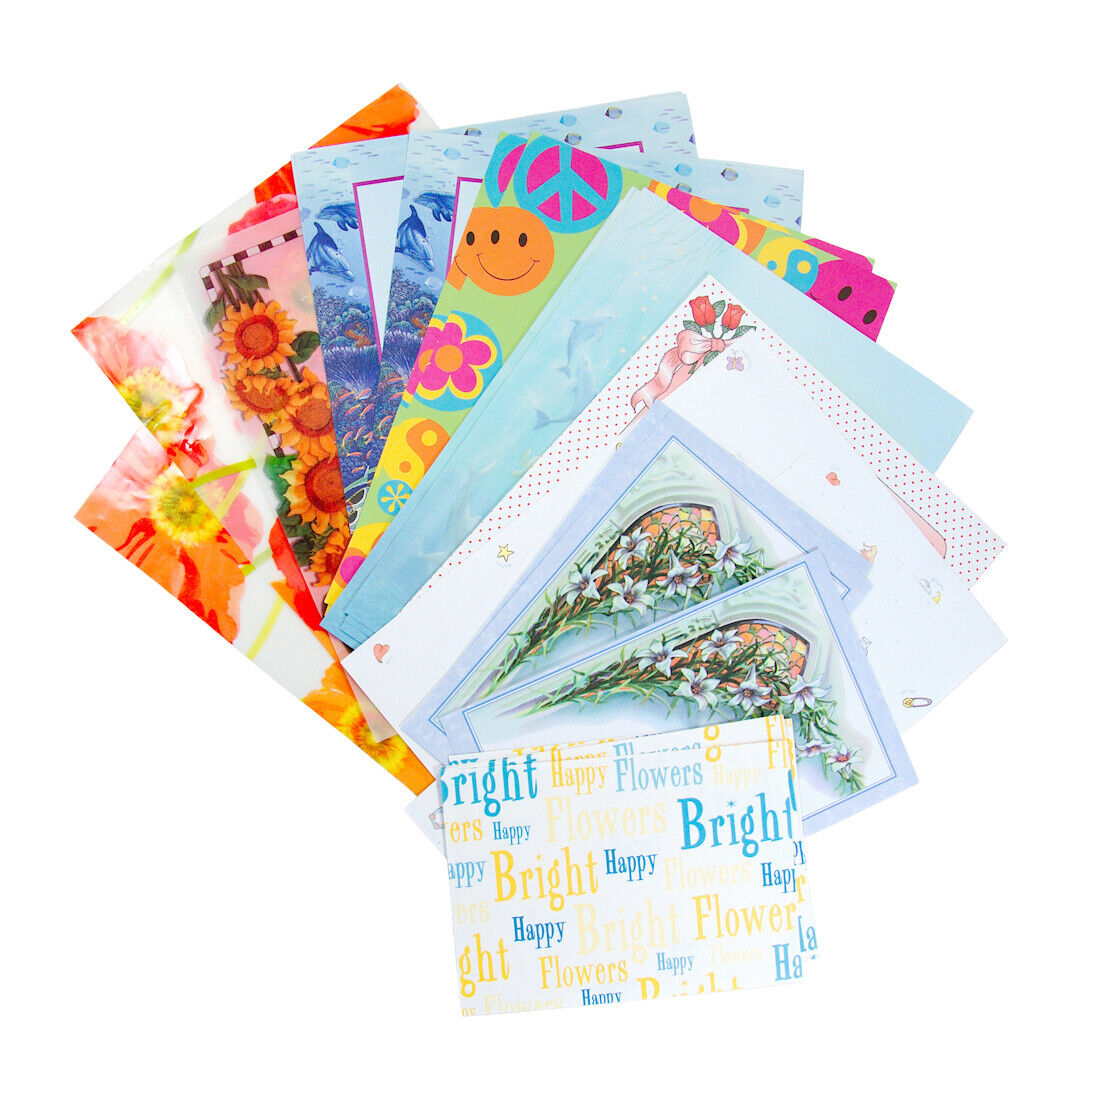 5oz Mixed Lot Decorative Scrapbooking Stationary Letter Paper Pages (30 Sheets)